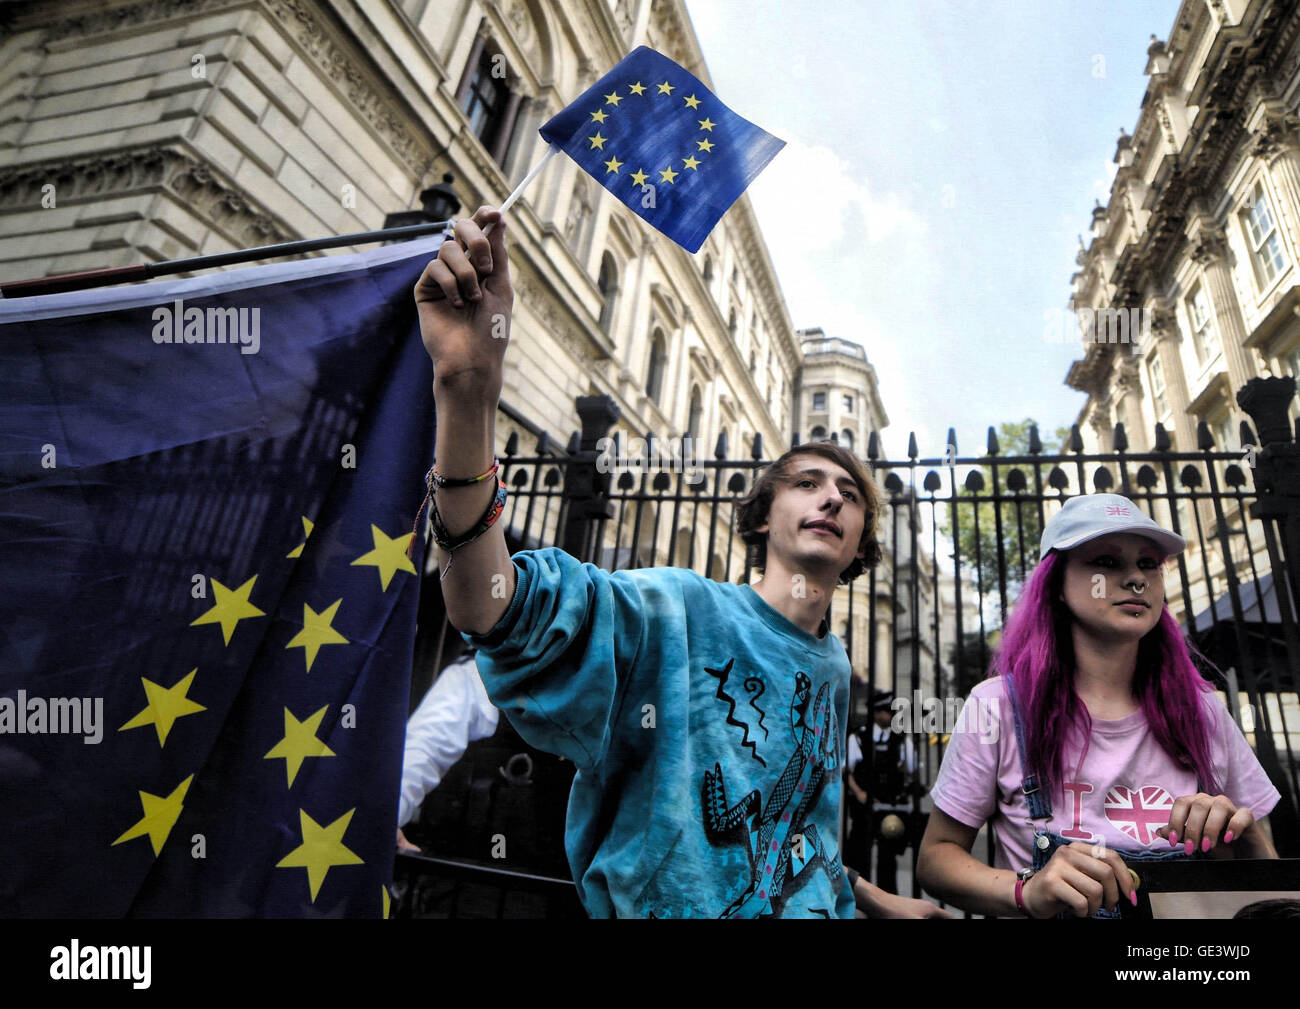 July 23, 2016 - Hundreds of Pro-European campaigners marched to 10 Downing Street to show support for a stronger Europe and to remain in the EU. A referendum for Great Britain to leave the EU was held on June 23rd and passed. © Gail Orenstein/ZUMA Wire/Alamy Live News Stock Photo